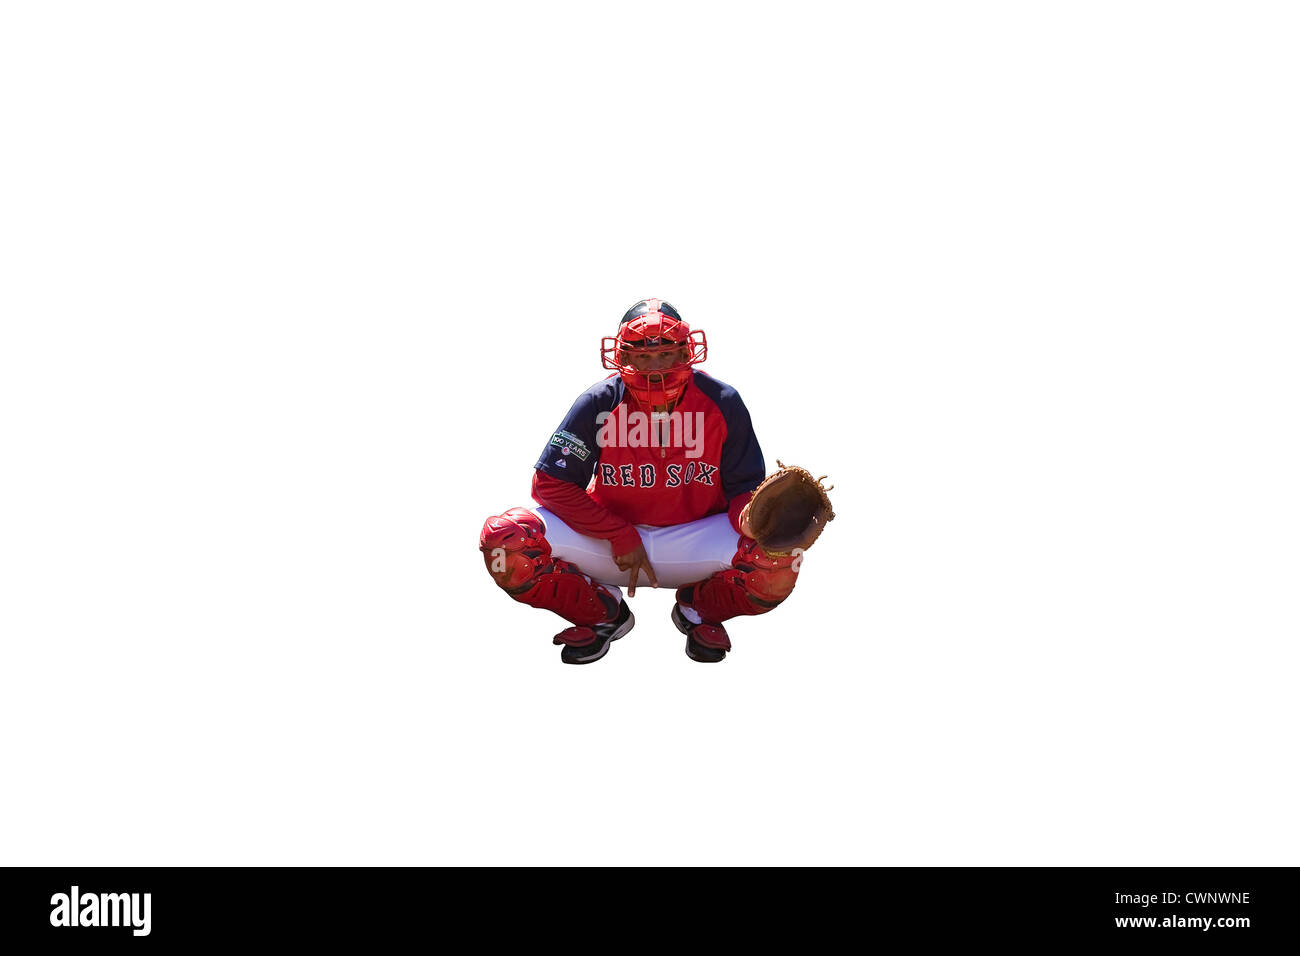 Cut Out. Boston Red Sox Catcher with Catcher's Mitt showing a "deuce" or a two finger sign between his legs on white background. Stock Photo